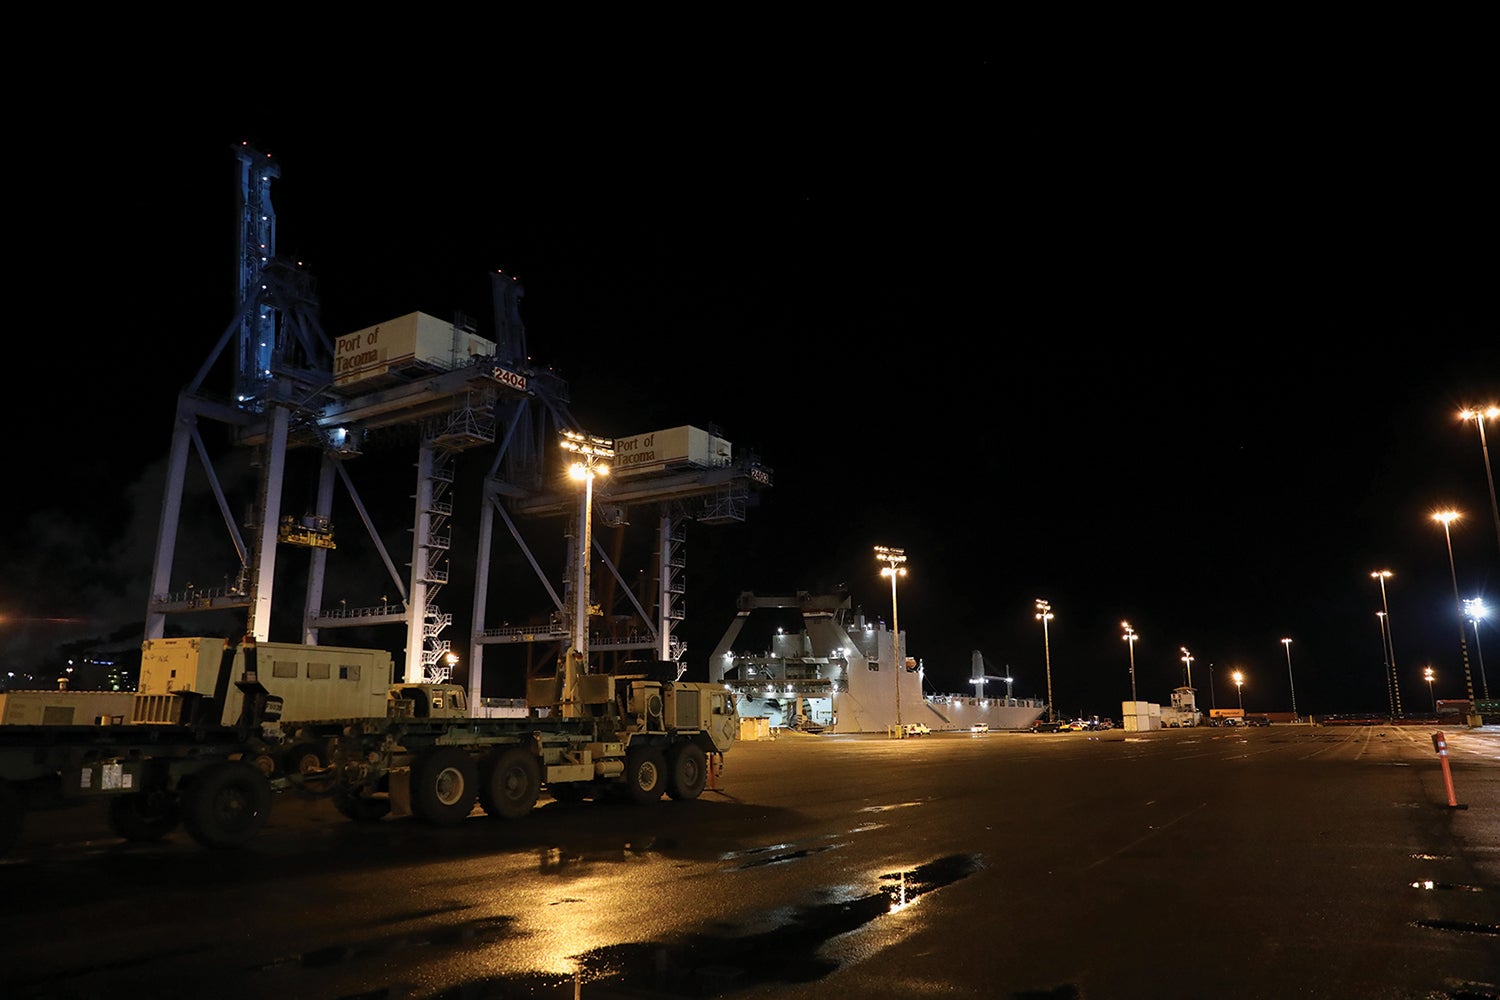 Opposite below: I Corps soldiers stage vehicles at the Port of Tacoma, Washington, for transport to an Operation Pathways exercise. (Credit: U.S. Army/Sgt. Joshua Oh)